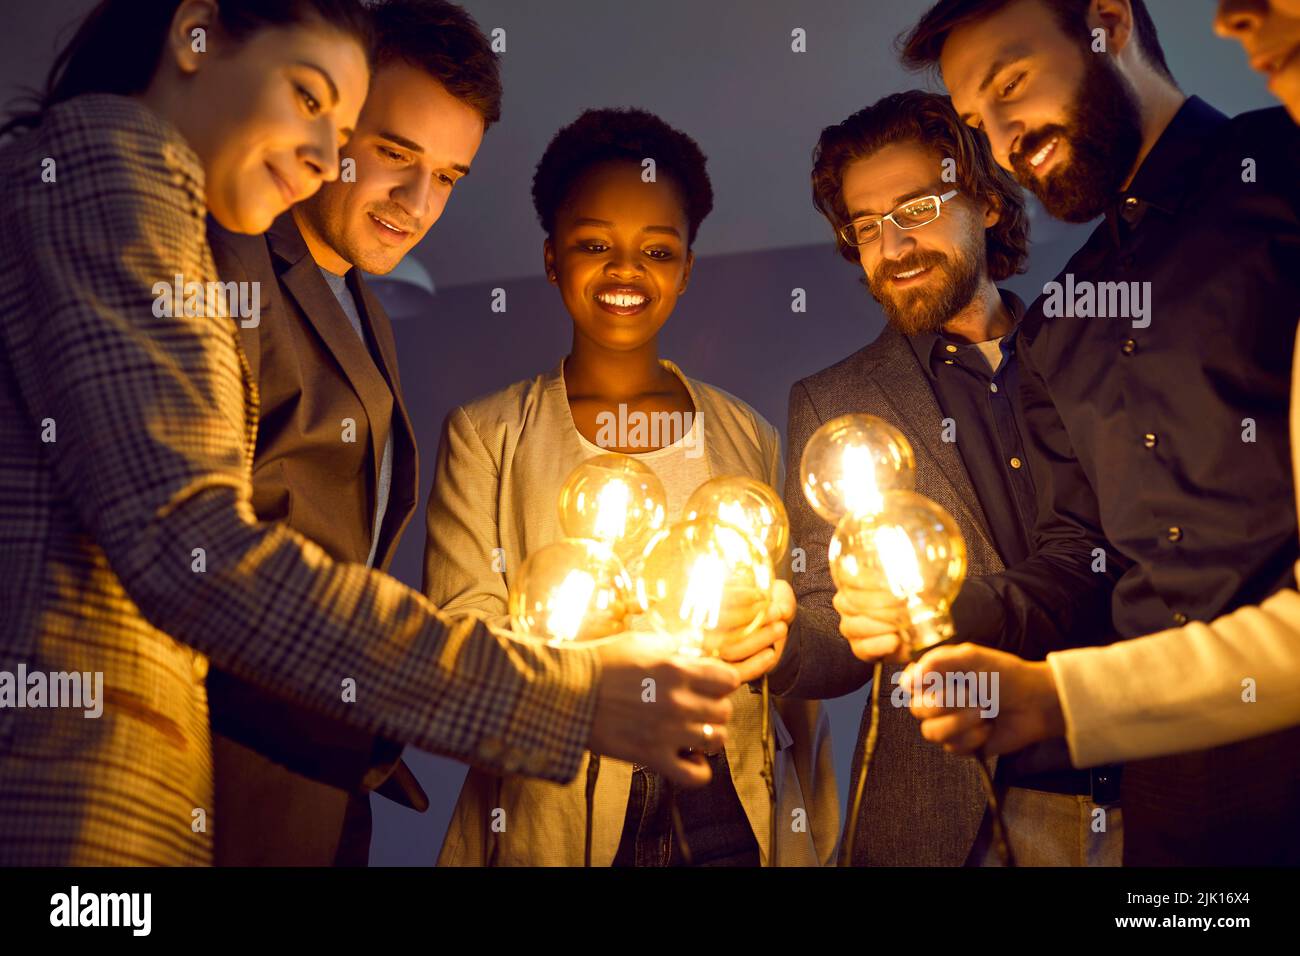 Diverse team of business people sharing creative ideas and working towards success together Stock Photo